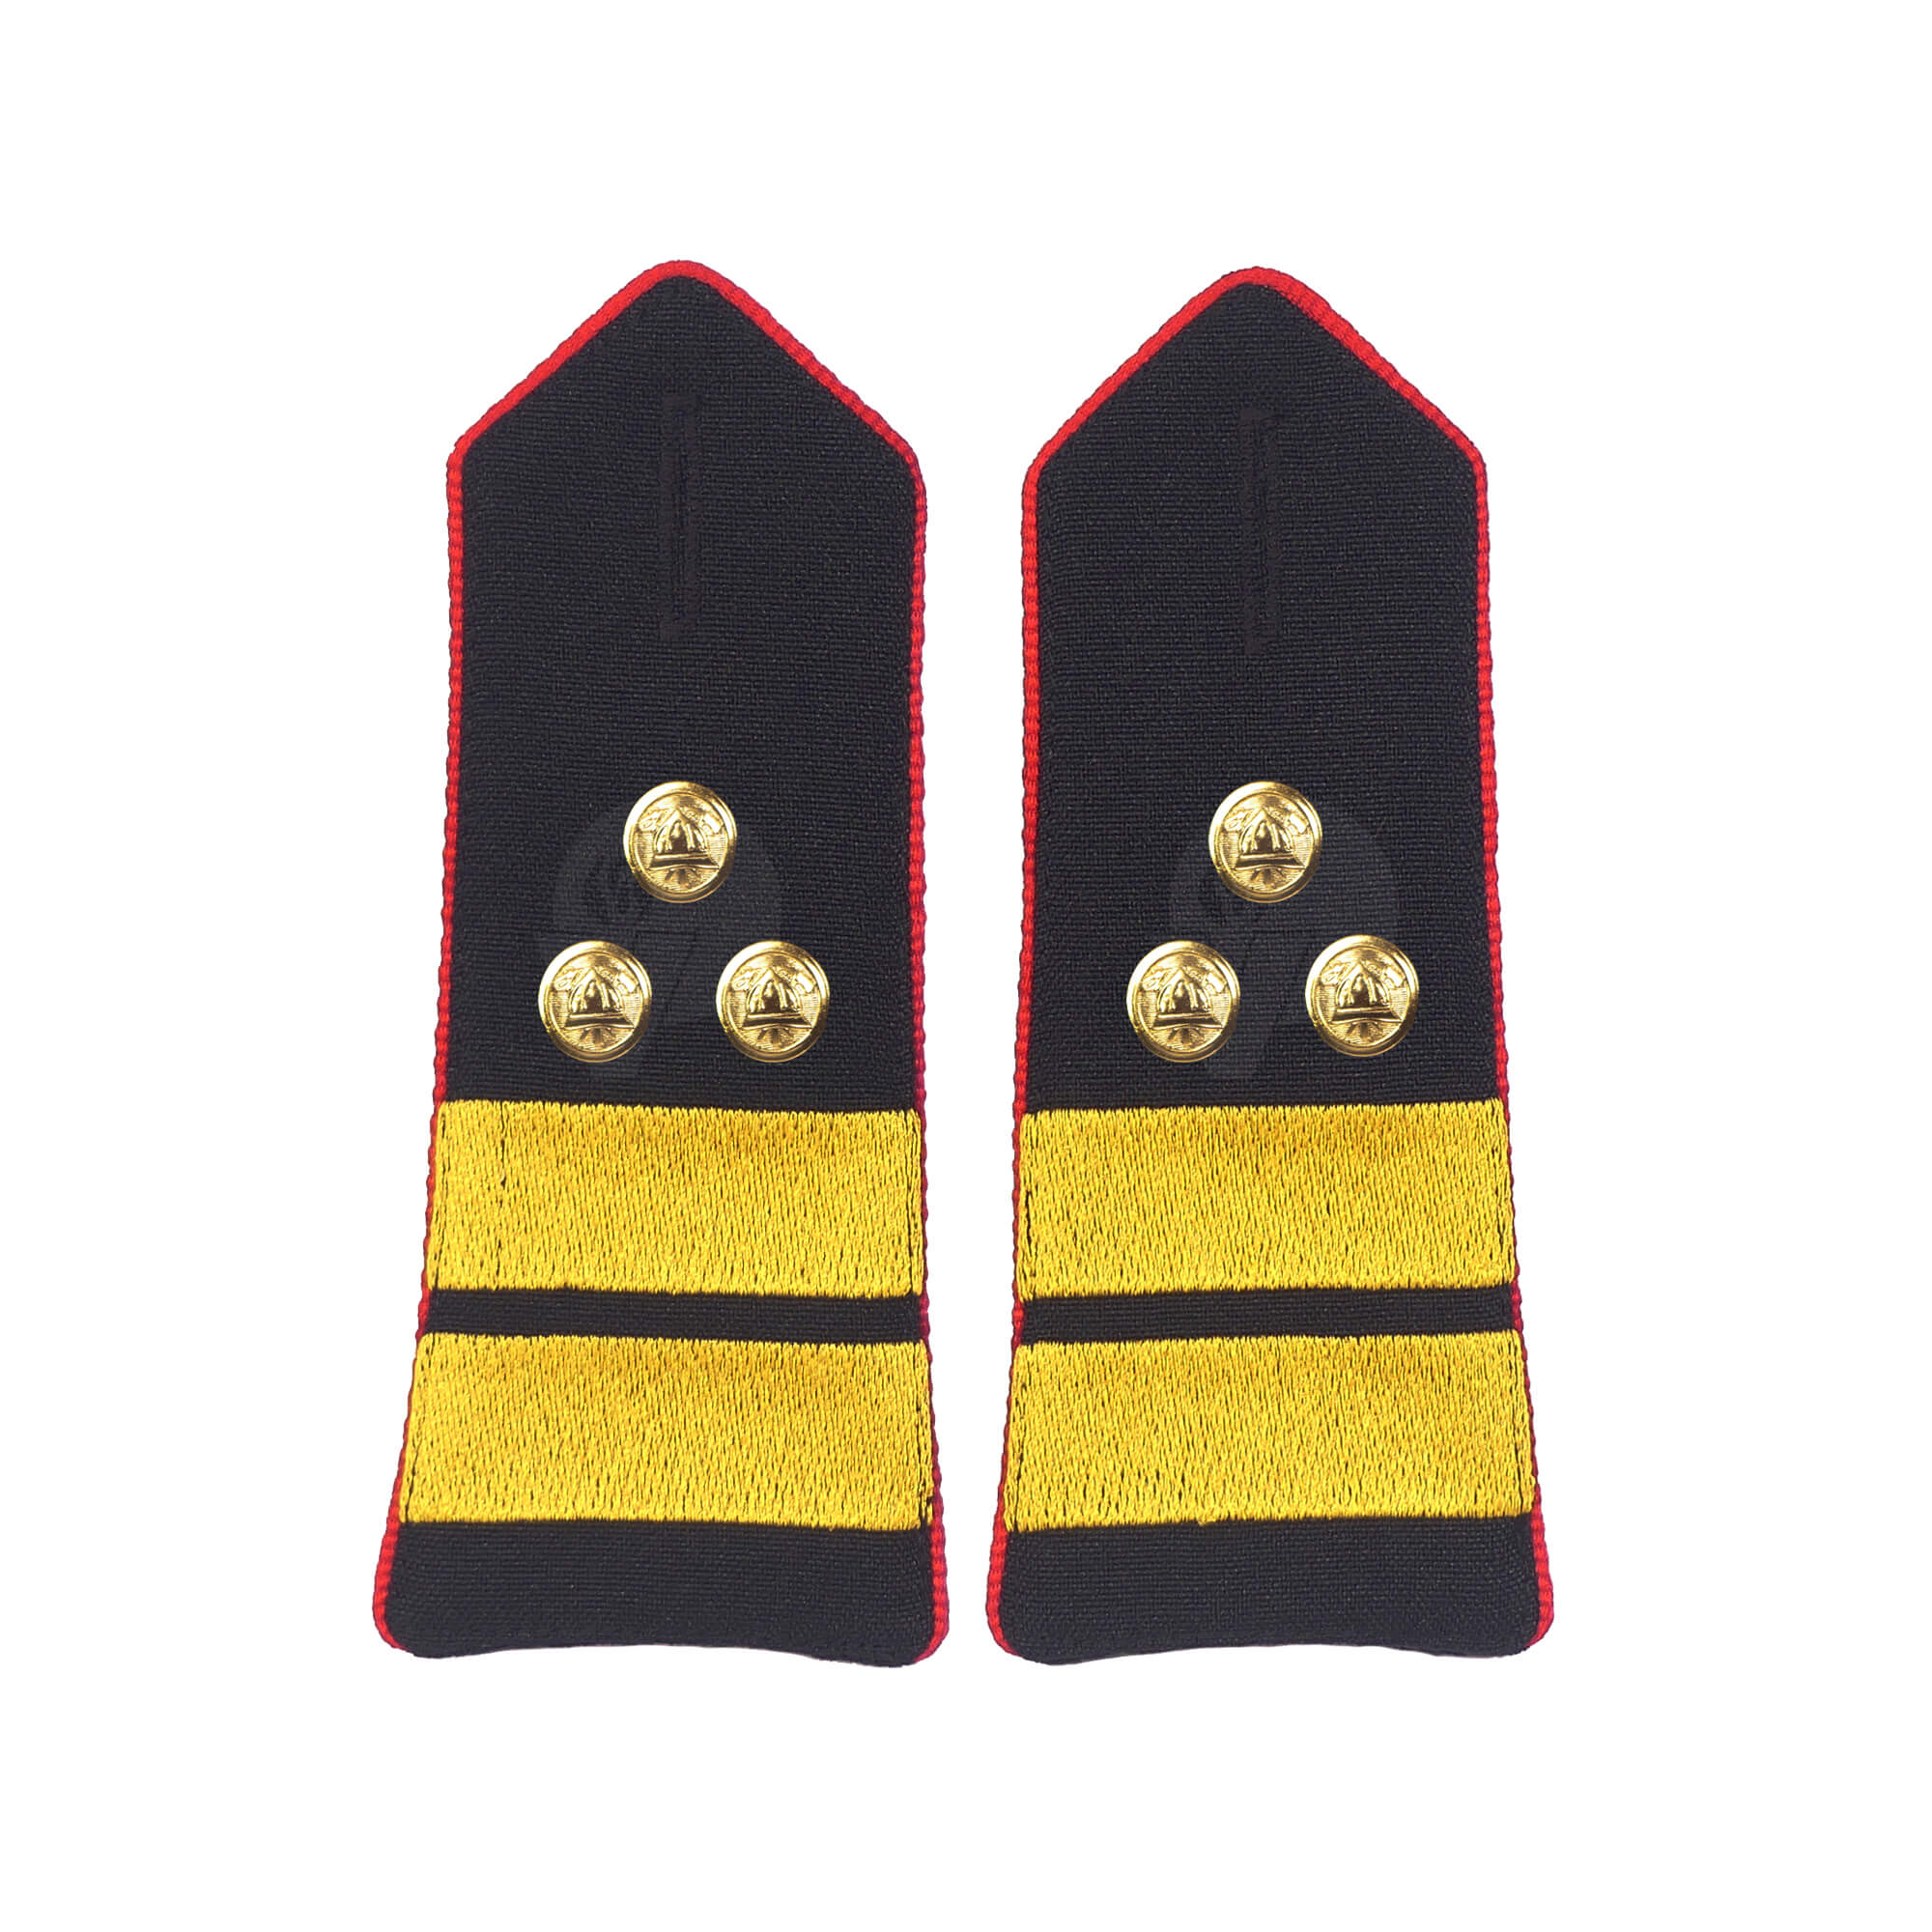 Rank Marks for Professional Firefighters, First Class Senior Fire Officer